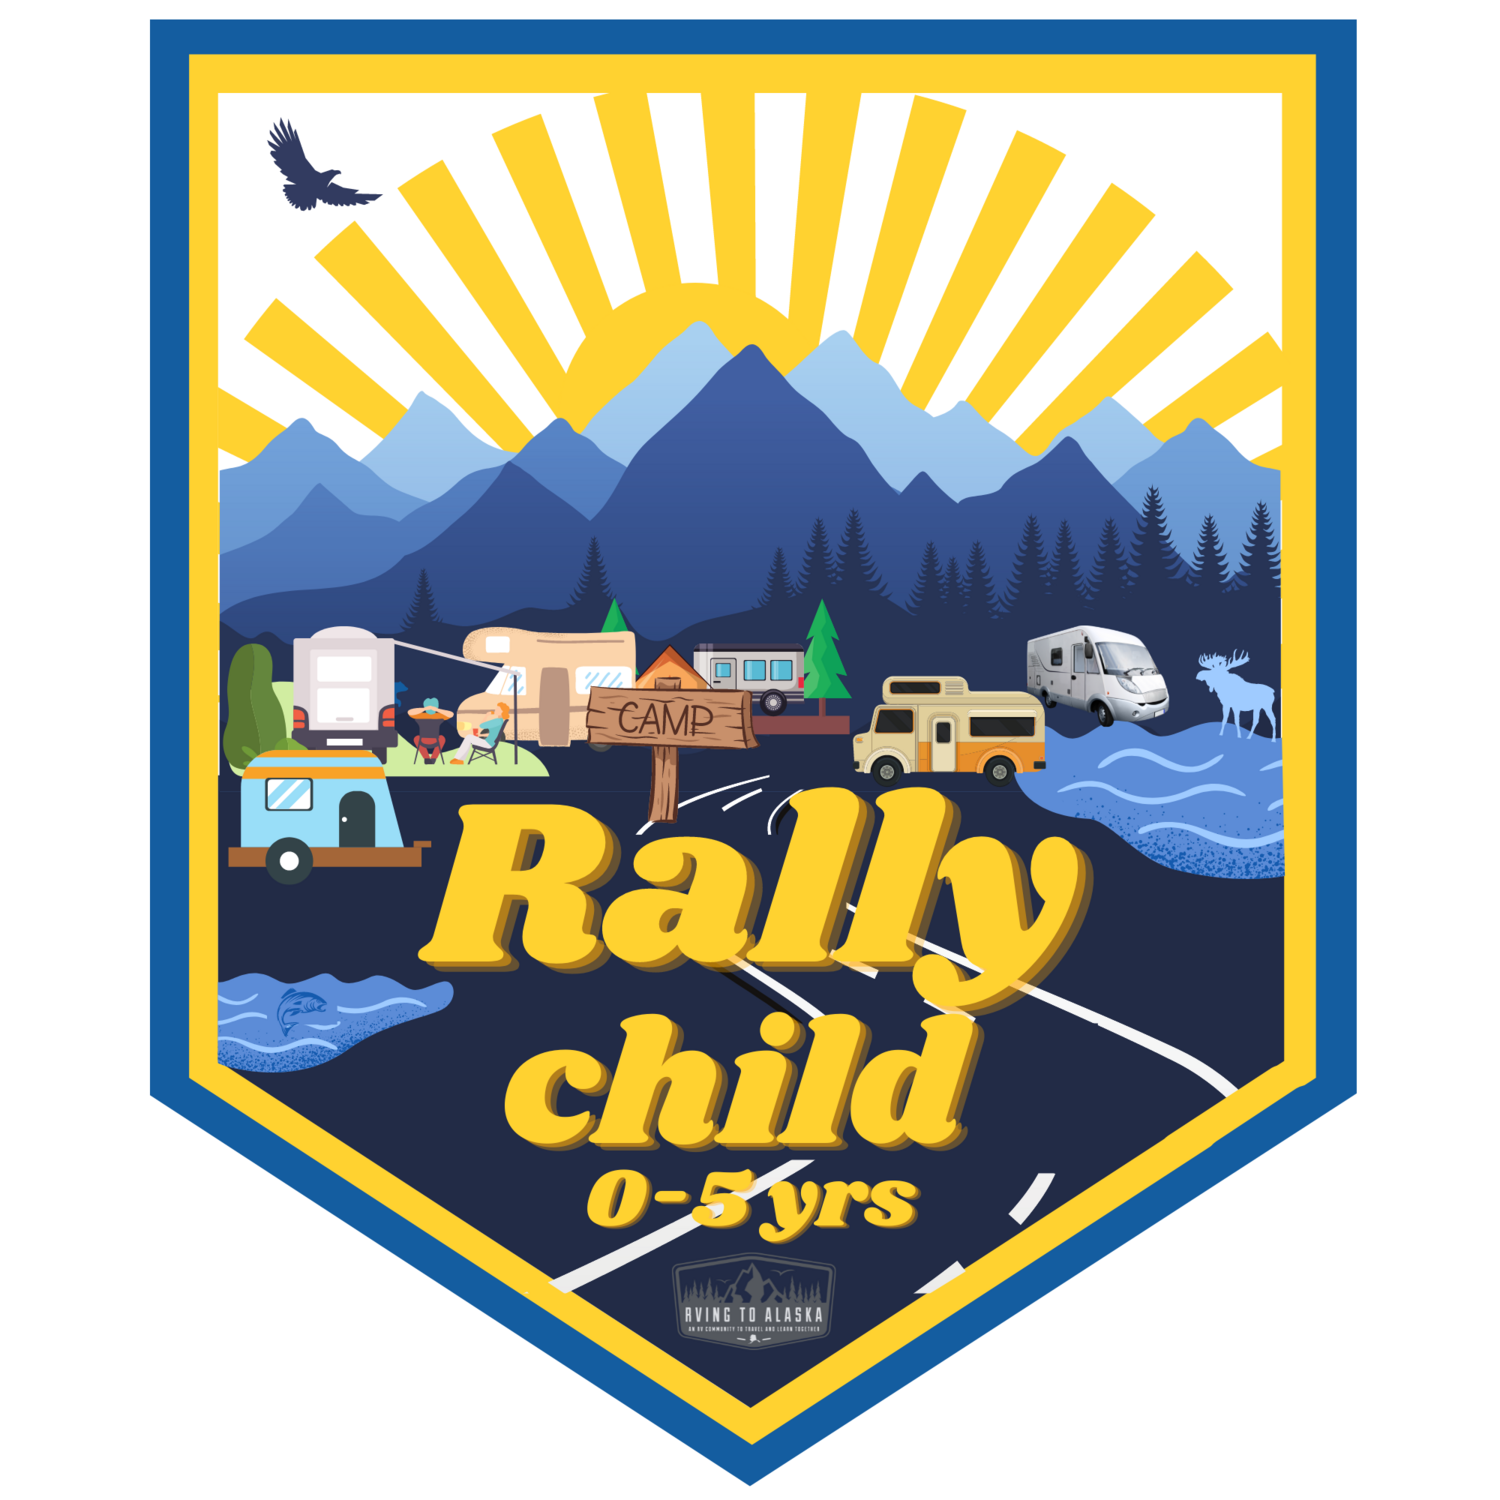 RV2AK23 Rally: Child Ticket: 5yr old or Younger (FREE)